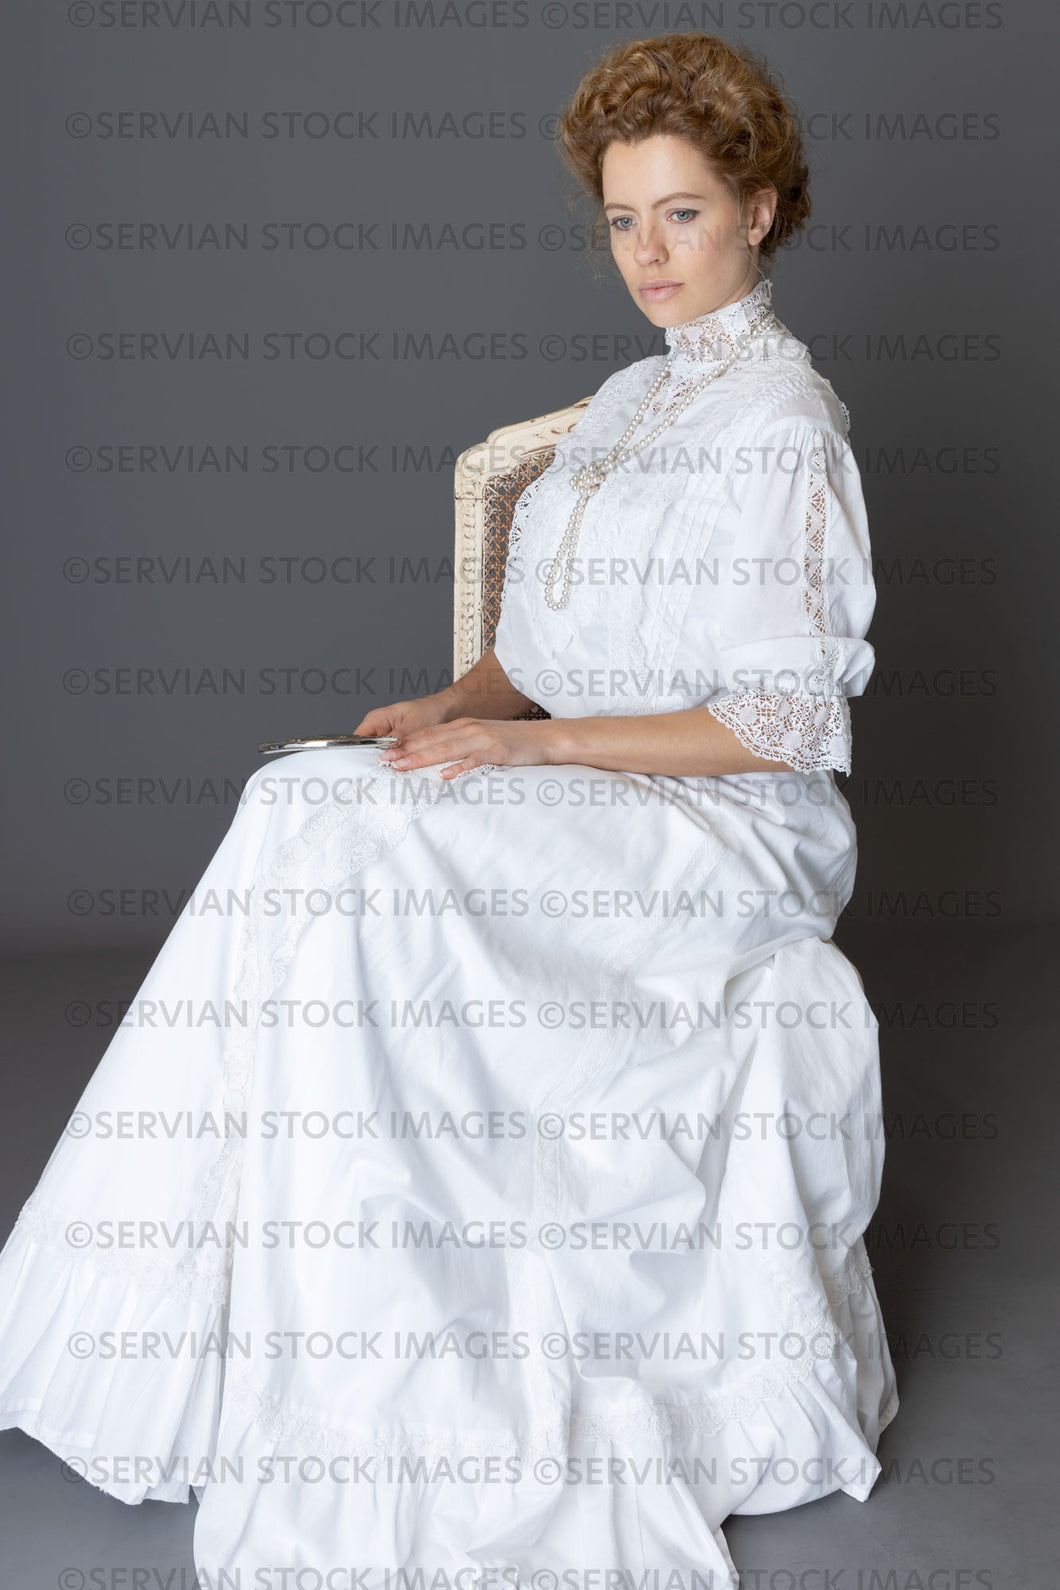 Edwardian woman in a white lace blouse and skirt with a pearl necklace (Anastasiya 4869)